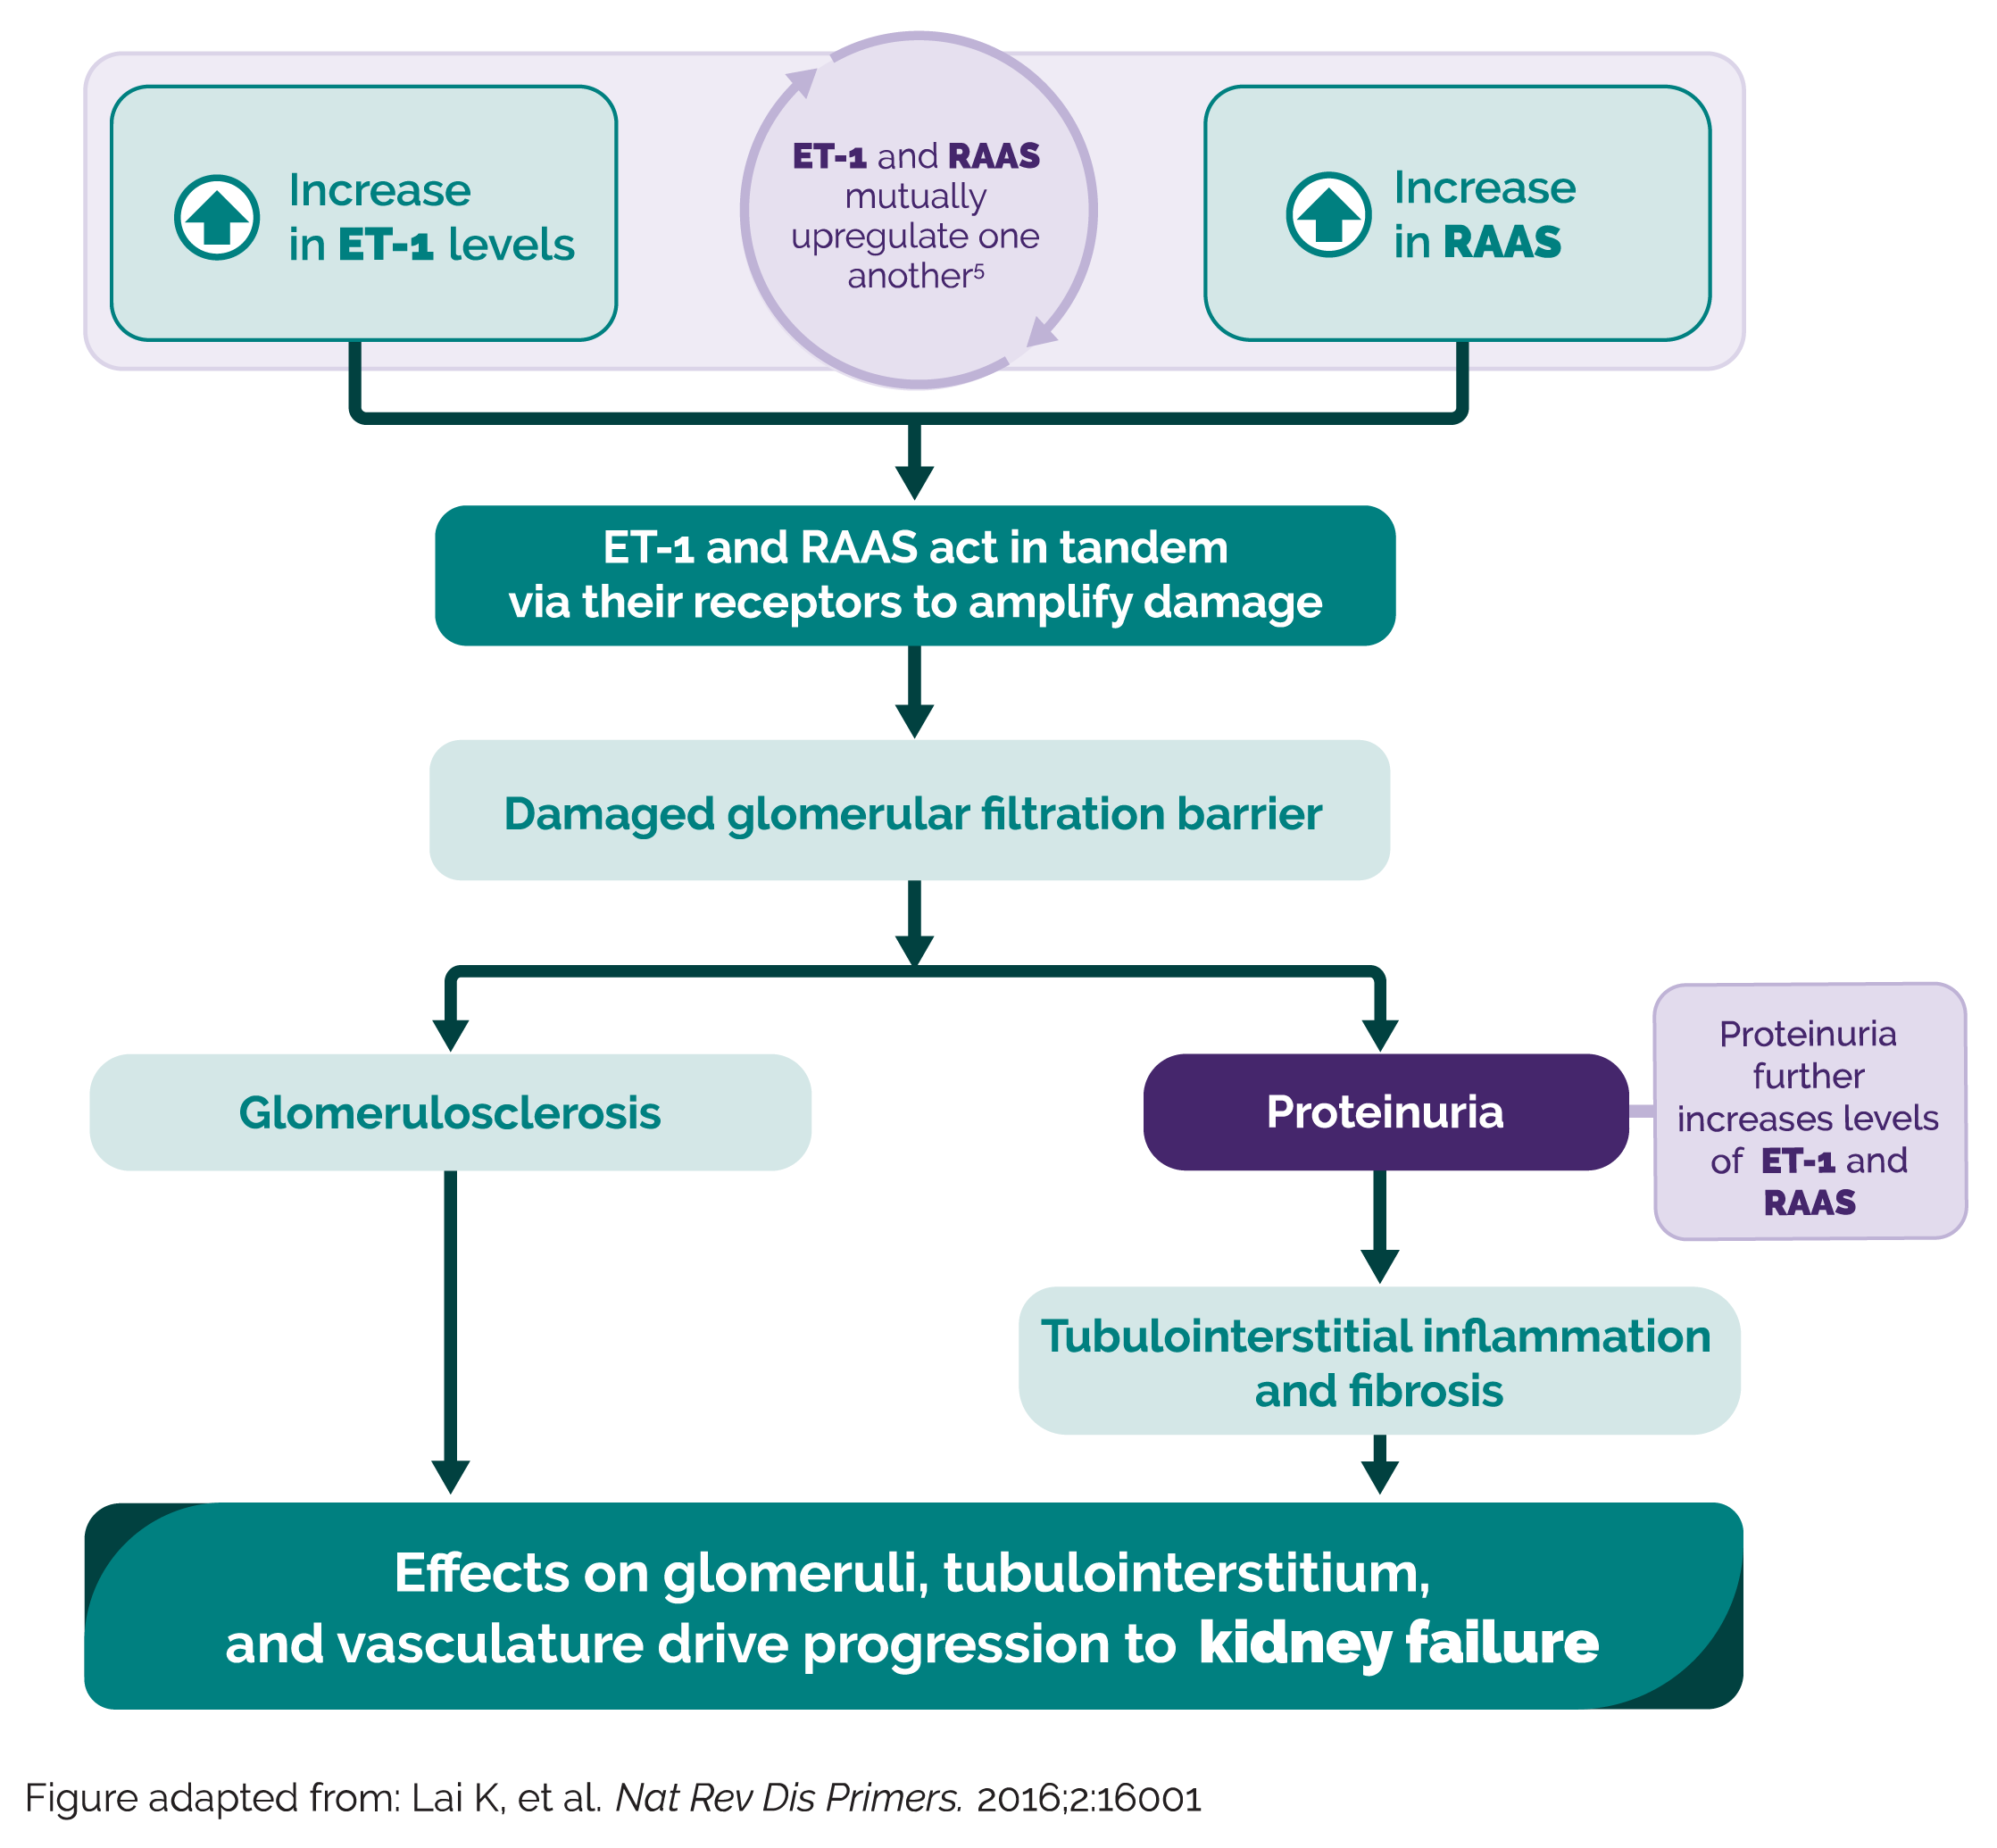 Flowchart showing increases in ET-1 and Ang-II work in tandem to amplify damage to the glomerular filtration barrier leading to glomerulosclerosis and proteinuria that drive kidney failure progression.